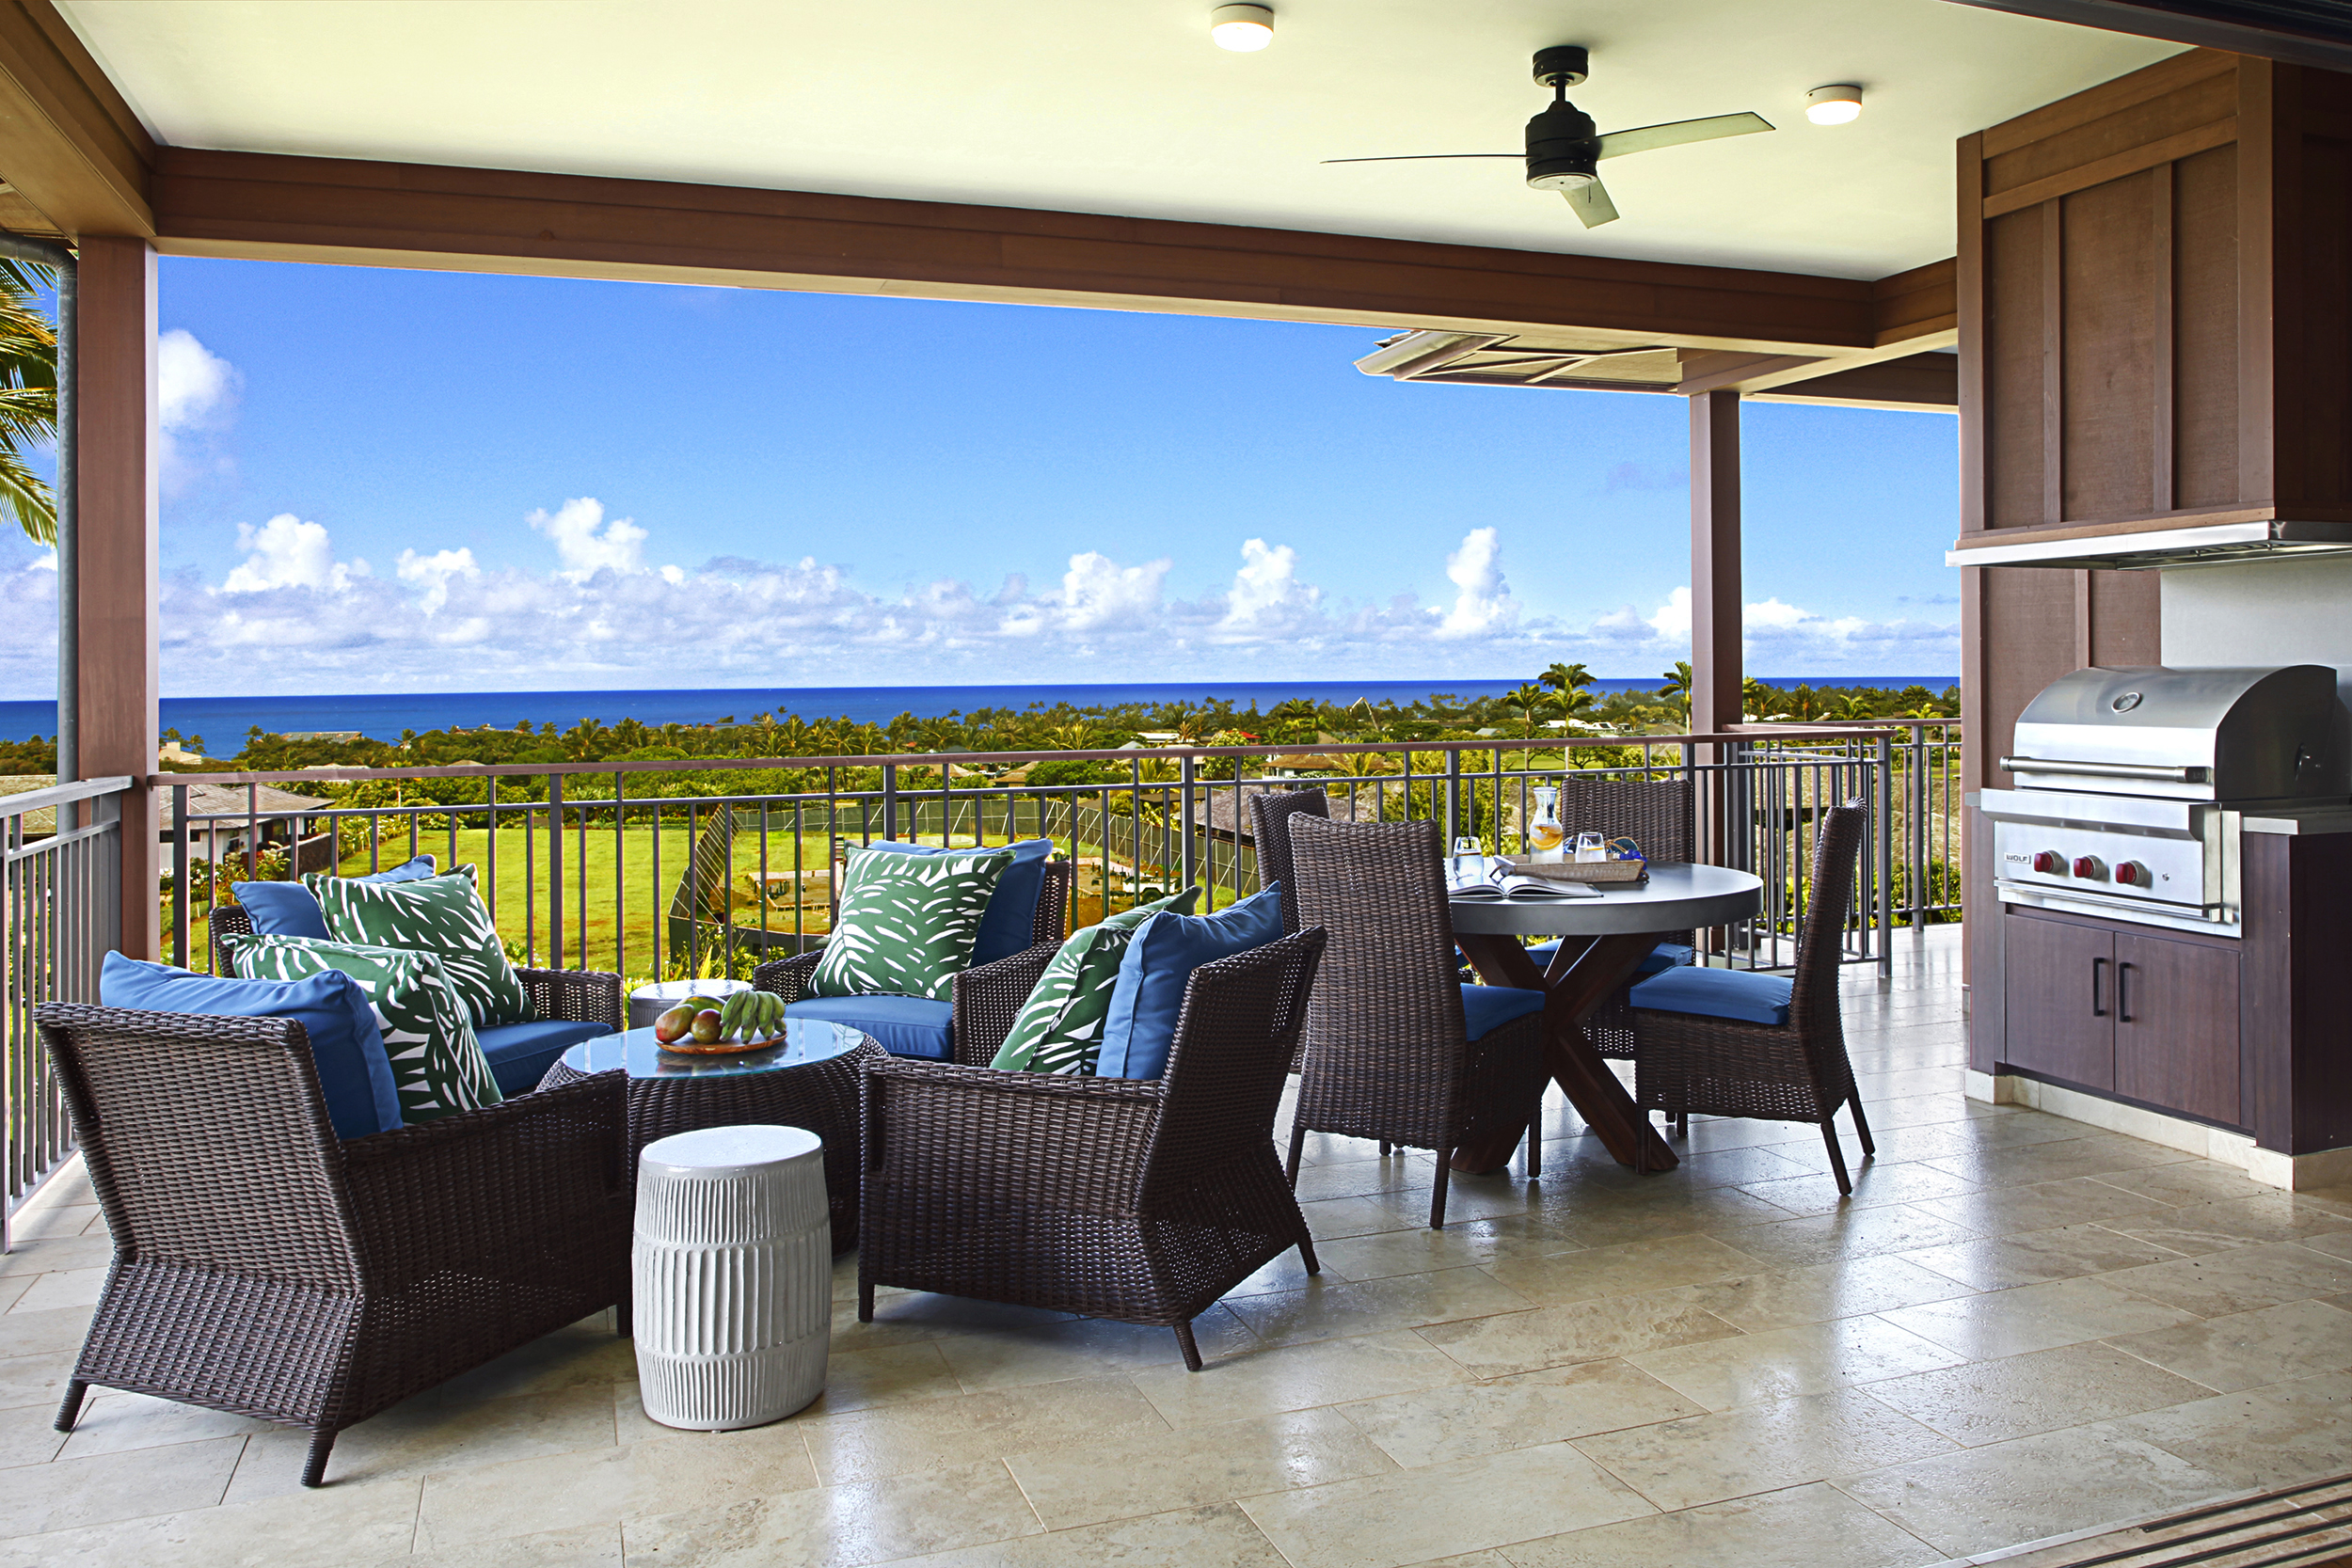 Lanai seating with outdoor dining and gas BBQ to entertain friends or simply relax